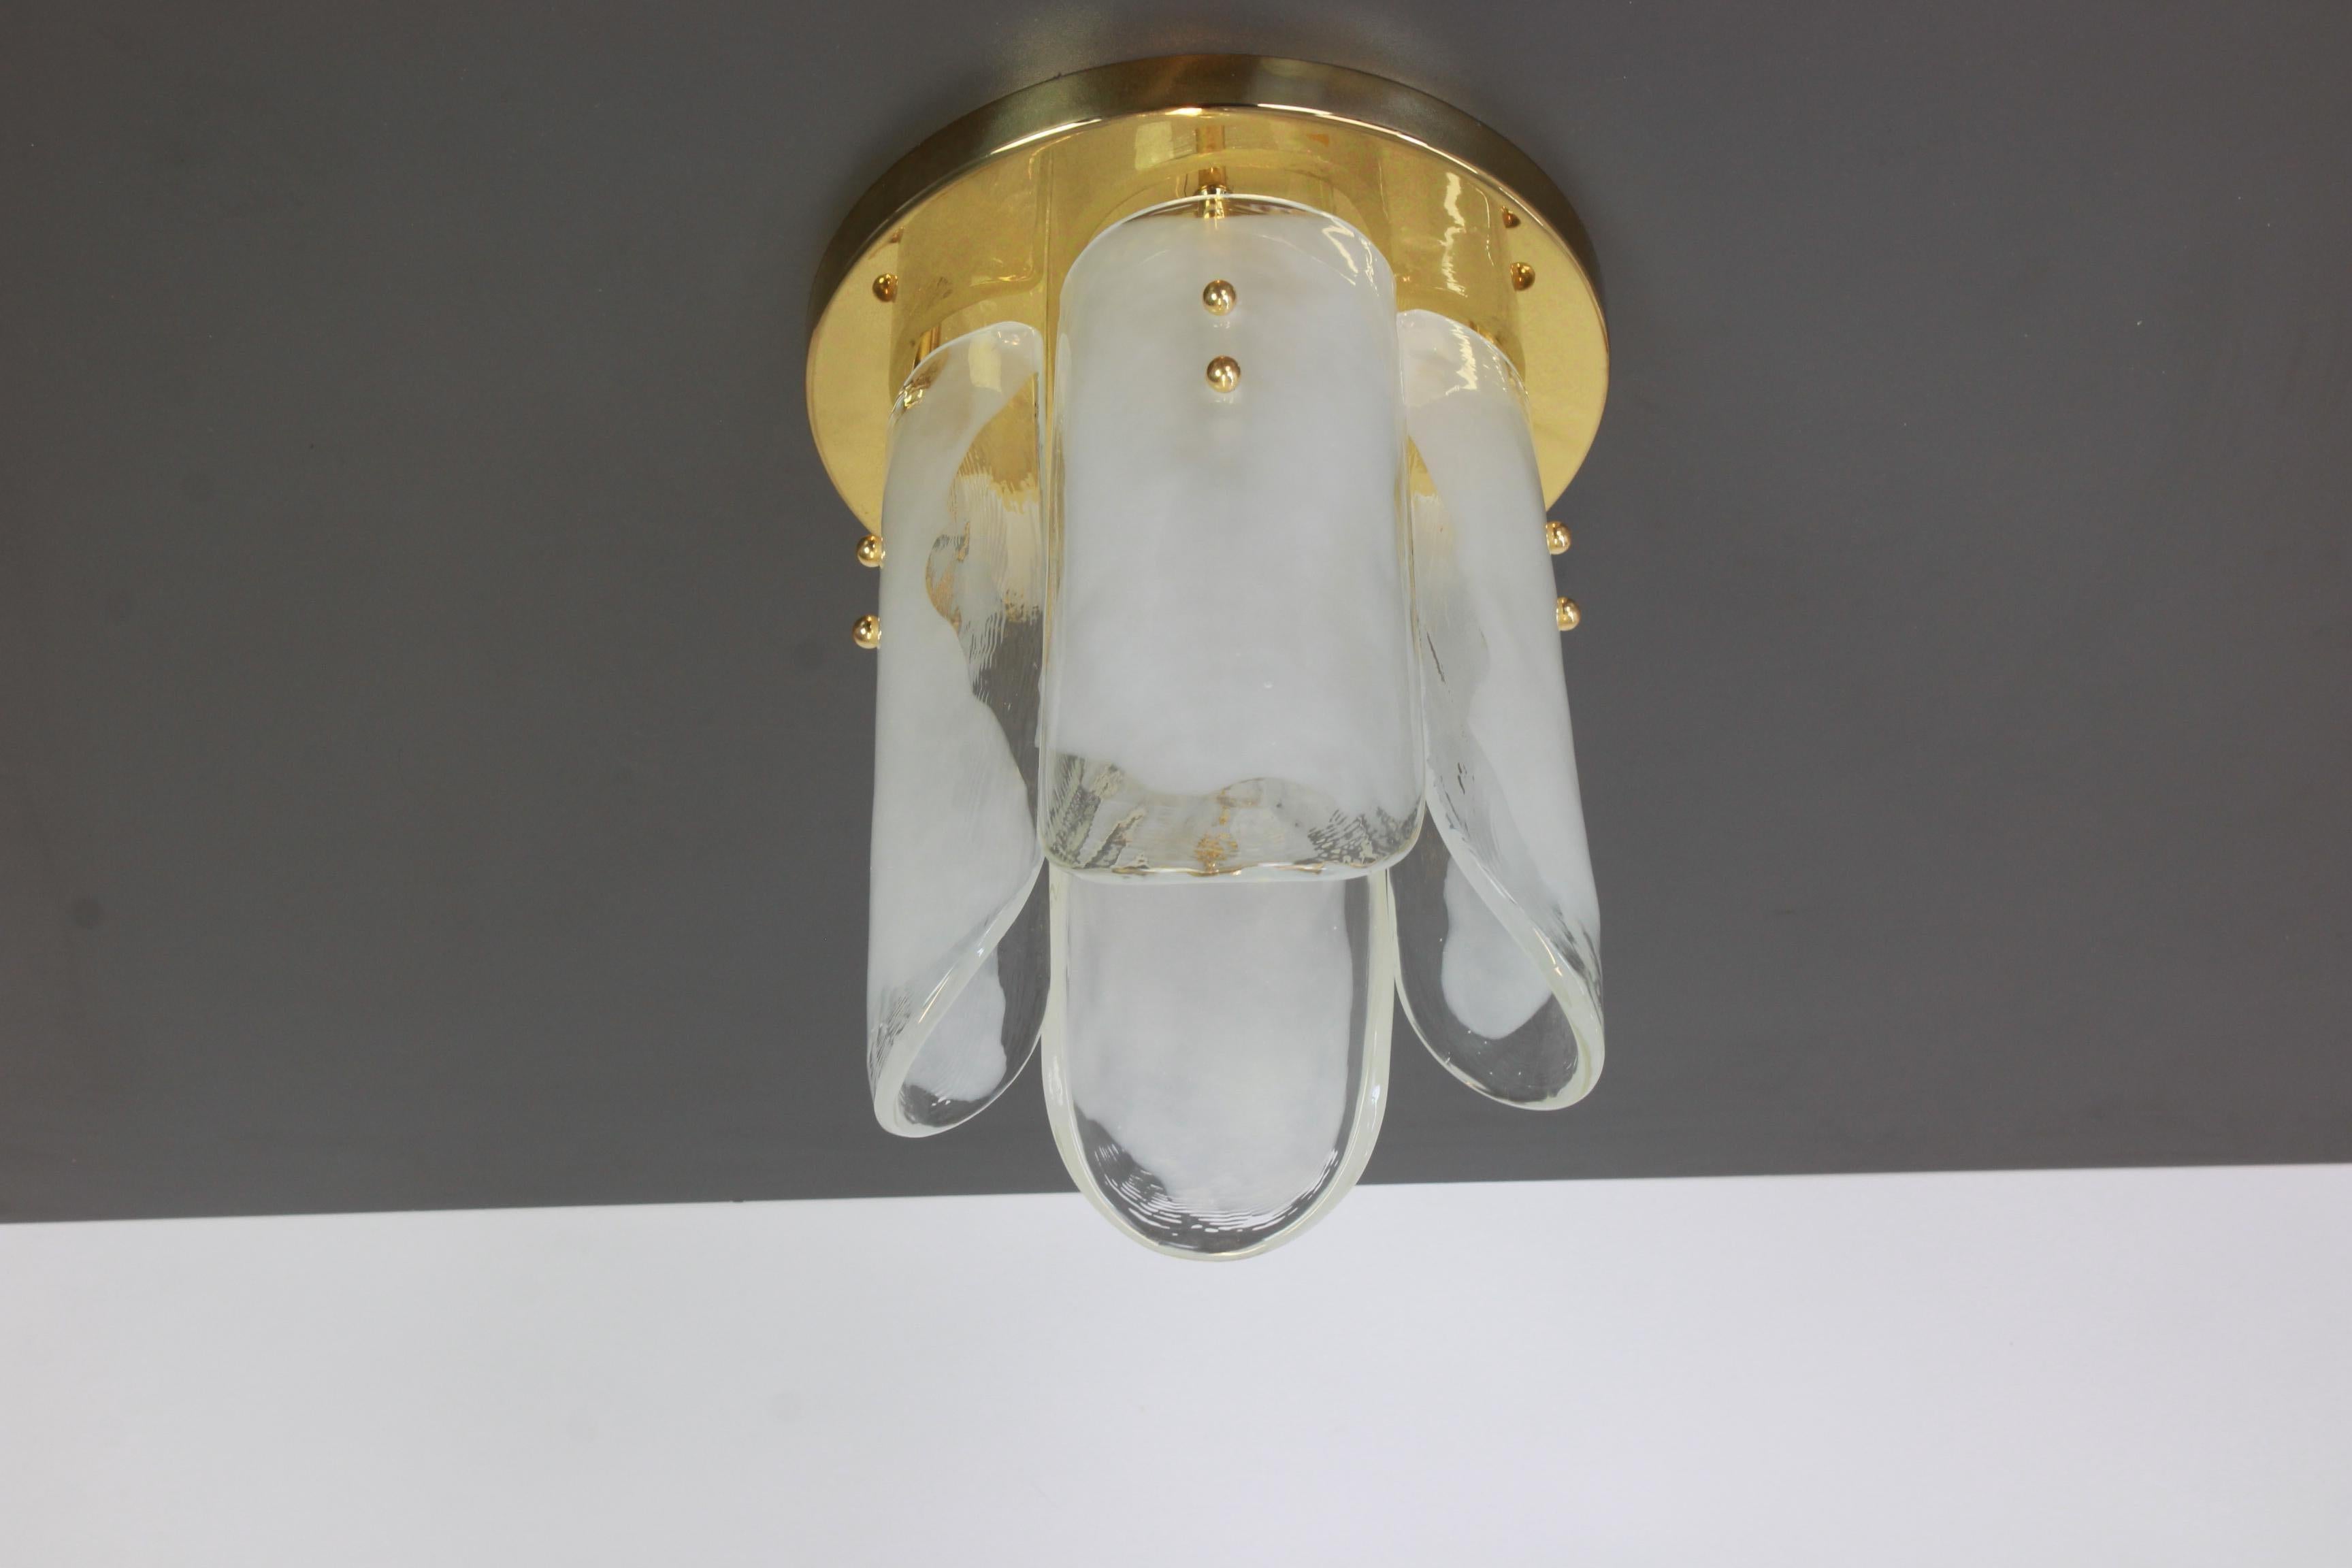 Wonderful brass light fixture made by Kalmar, Austria, manufactured, circa 1970-1979.
Great structure gathering 4 Murano structured glasses in leaves form, beautifully refracting the light very high quality.

High quality and in very good